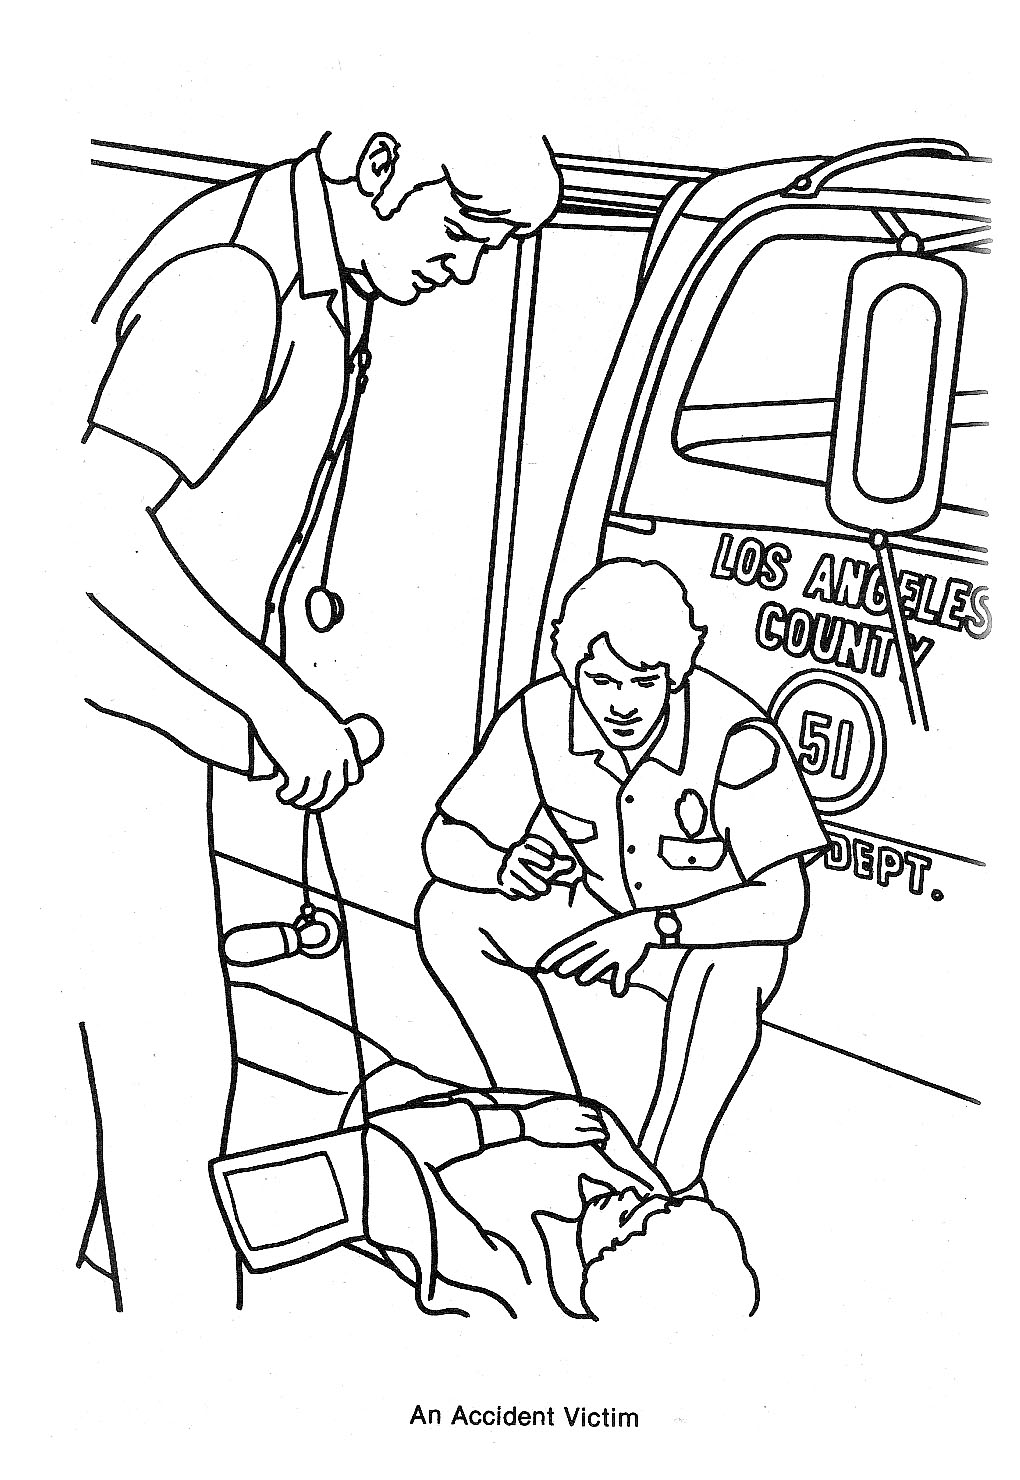 Emergency Vehicle Coloring Pages at GetDrawings.com | Free ...